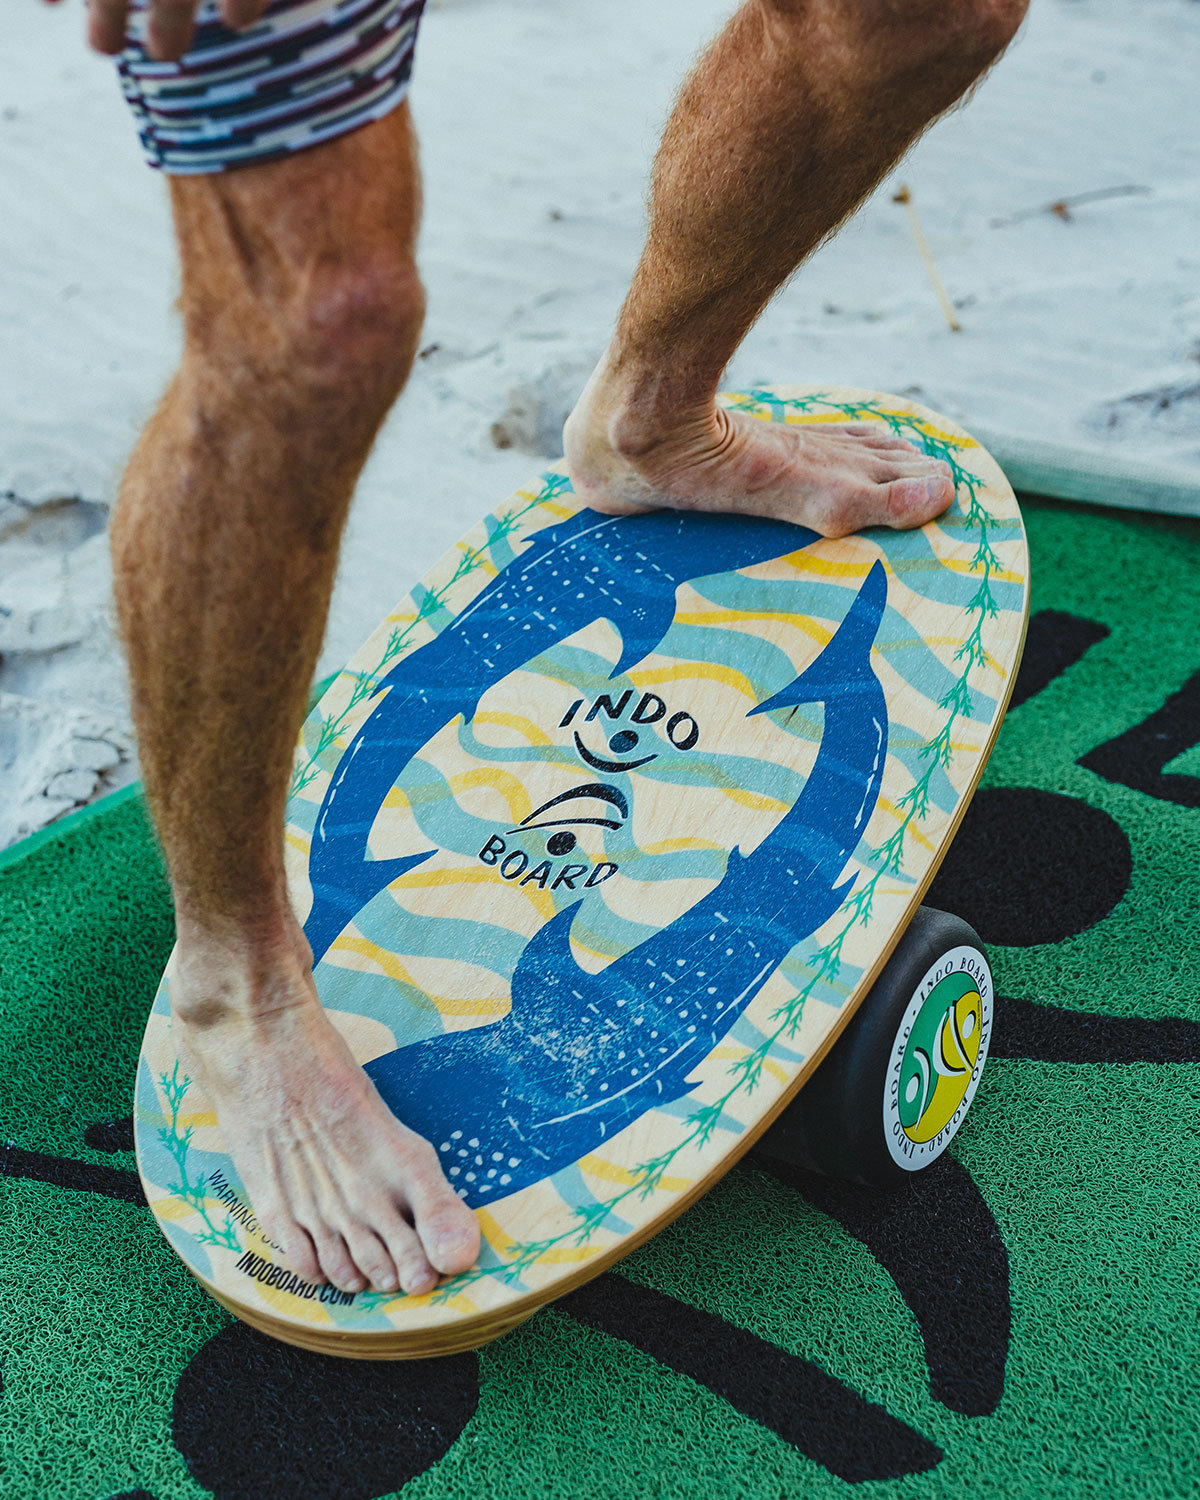 How To Ride an INDO BOARD - Getting Started on Your Balance